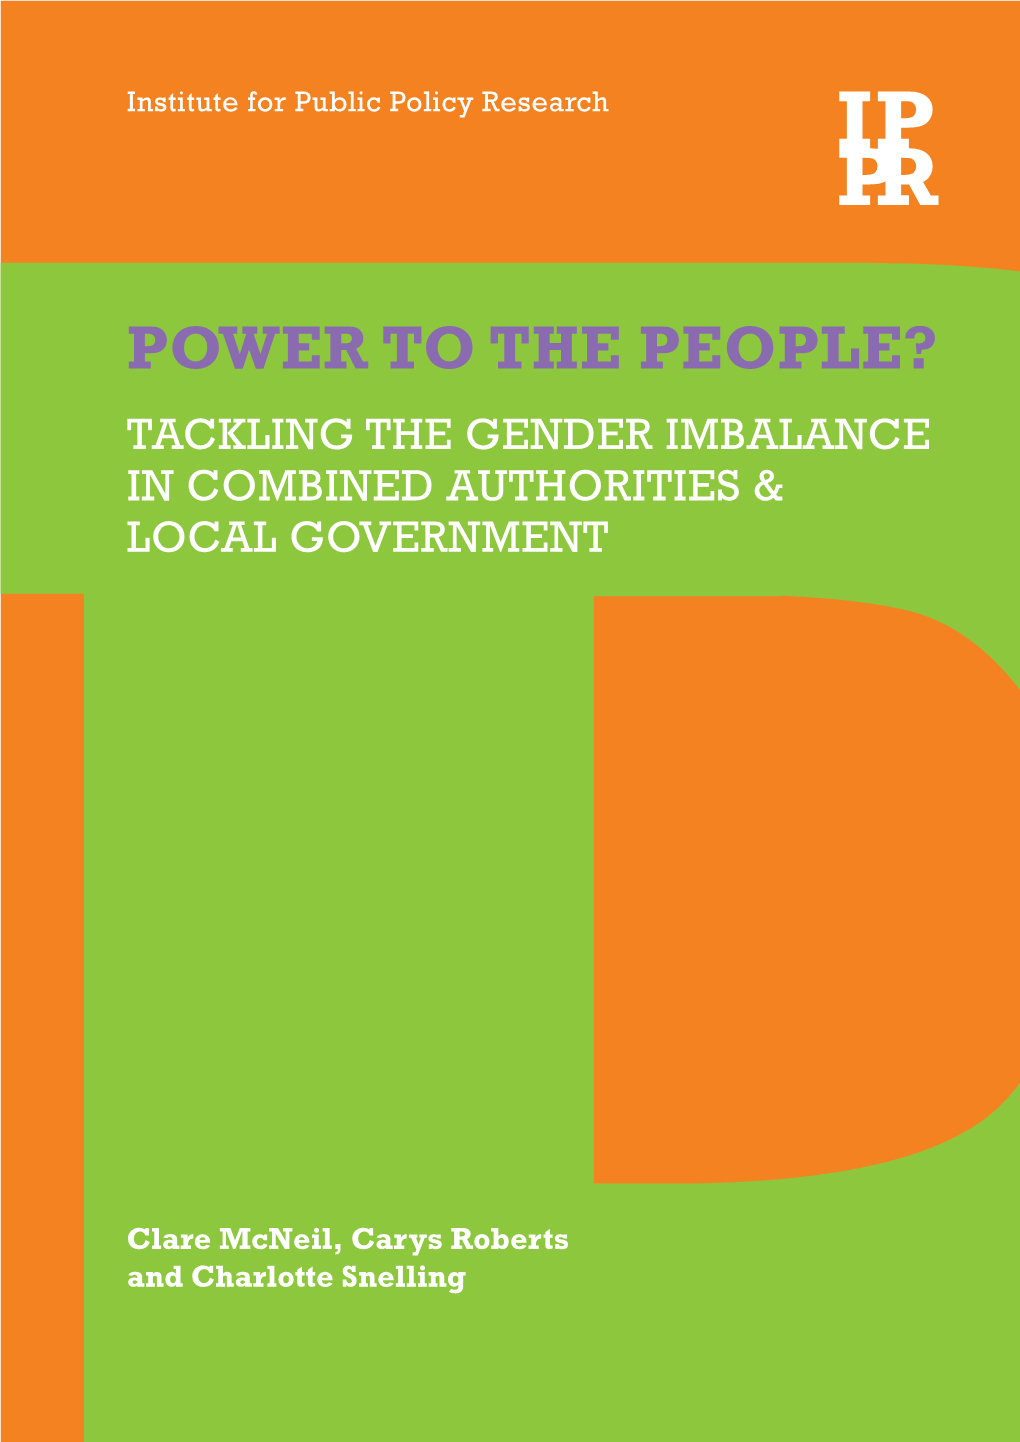 Power to the People? Tackling the Gender Imbalance in Combined Authorities & Local Government